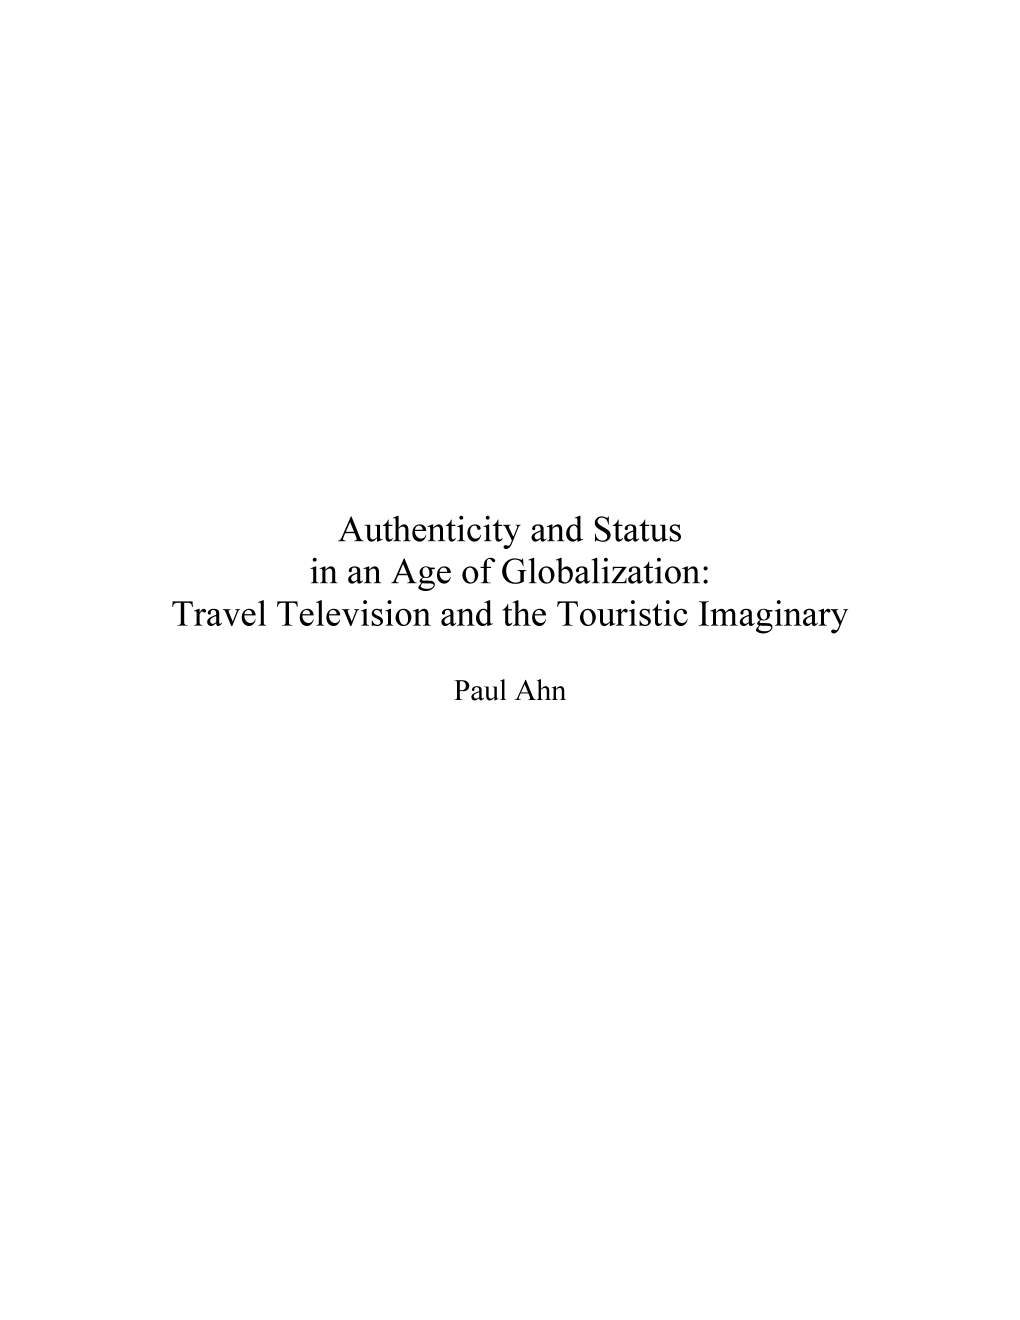 Authenticity and Status in an Age of Globalization: Travel Television and the Touristic Imaginary